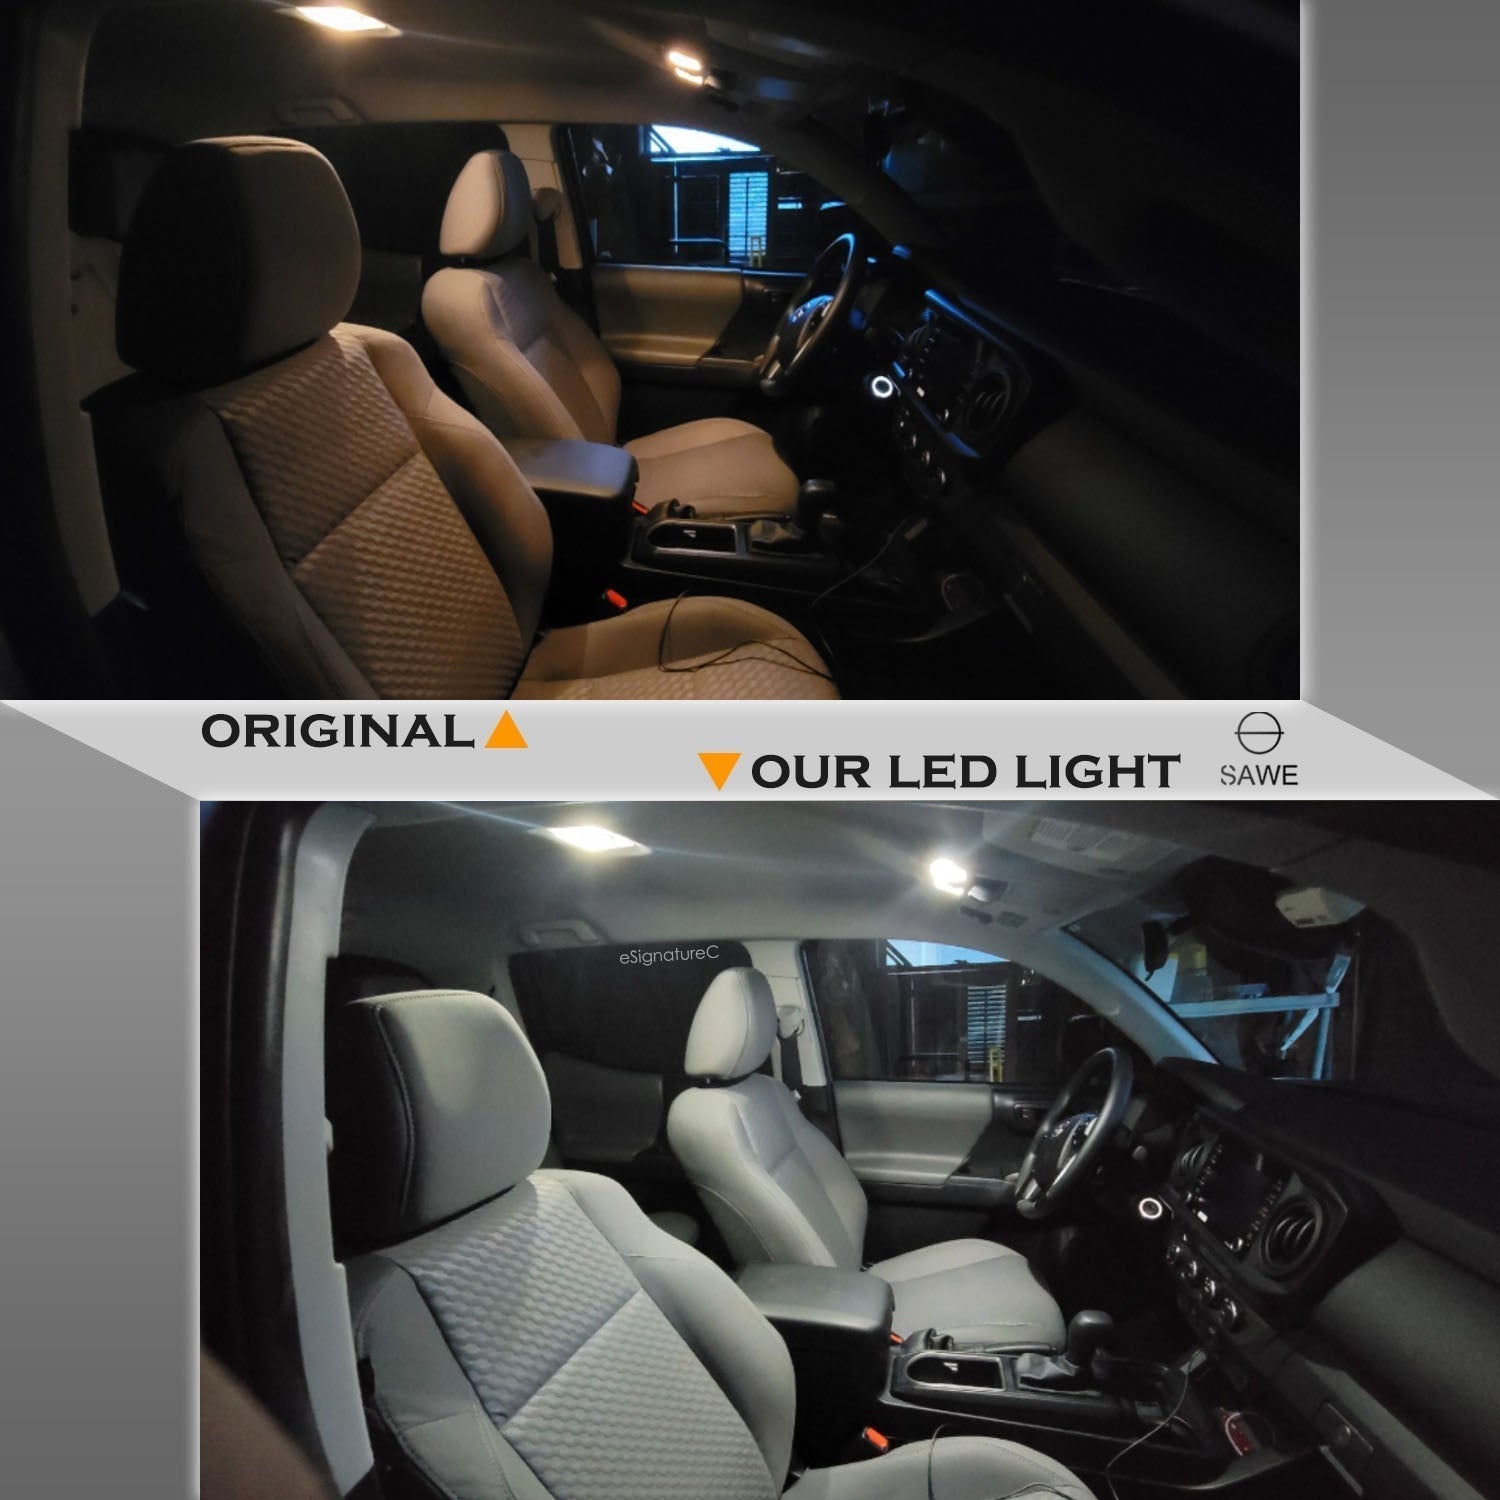 For Mazda CX9 CX-9 Interior LED Lights - Dome & Map Light Bulbs Package Kit for 2007 - 2021 - White